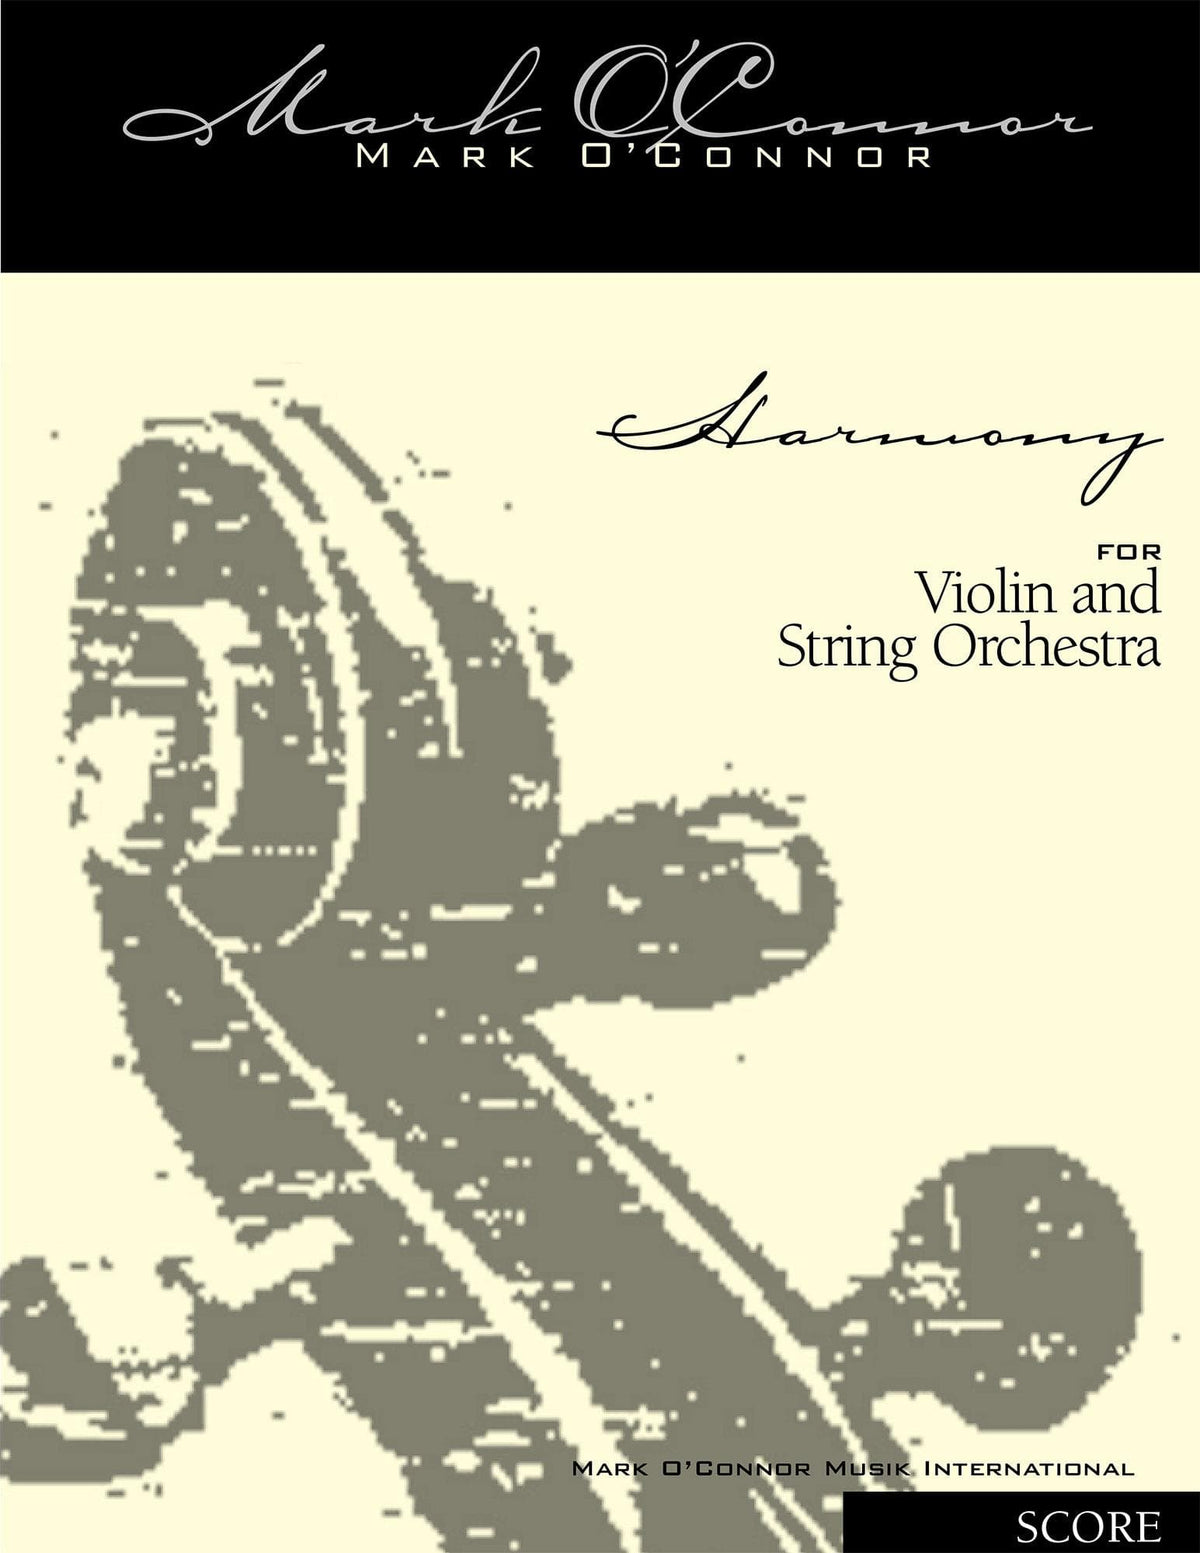 O'Connor, Mark - Harmony for Violin and Strings - Score - Digital Download